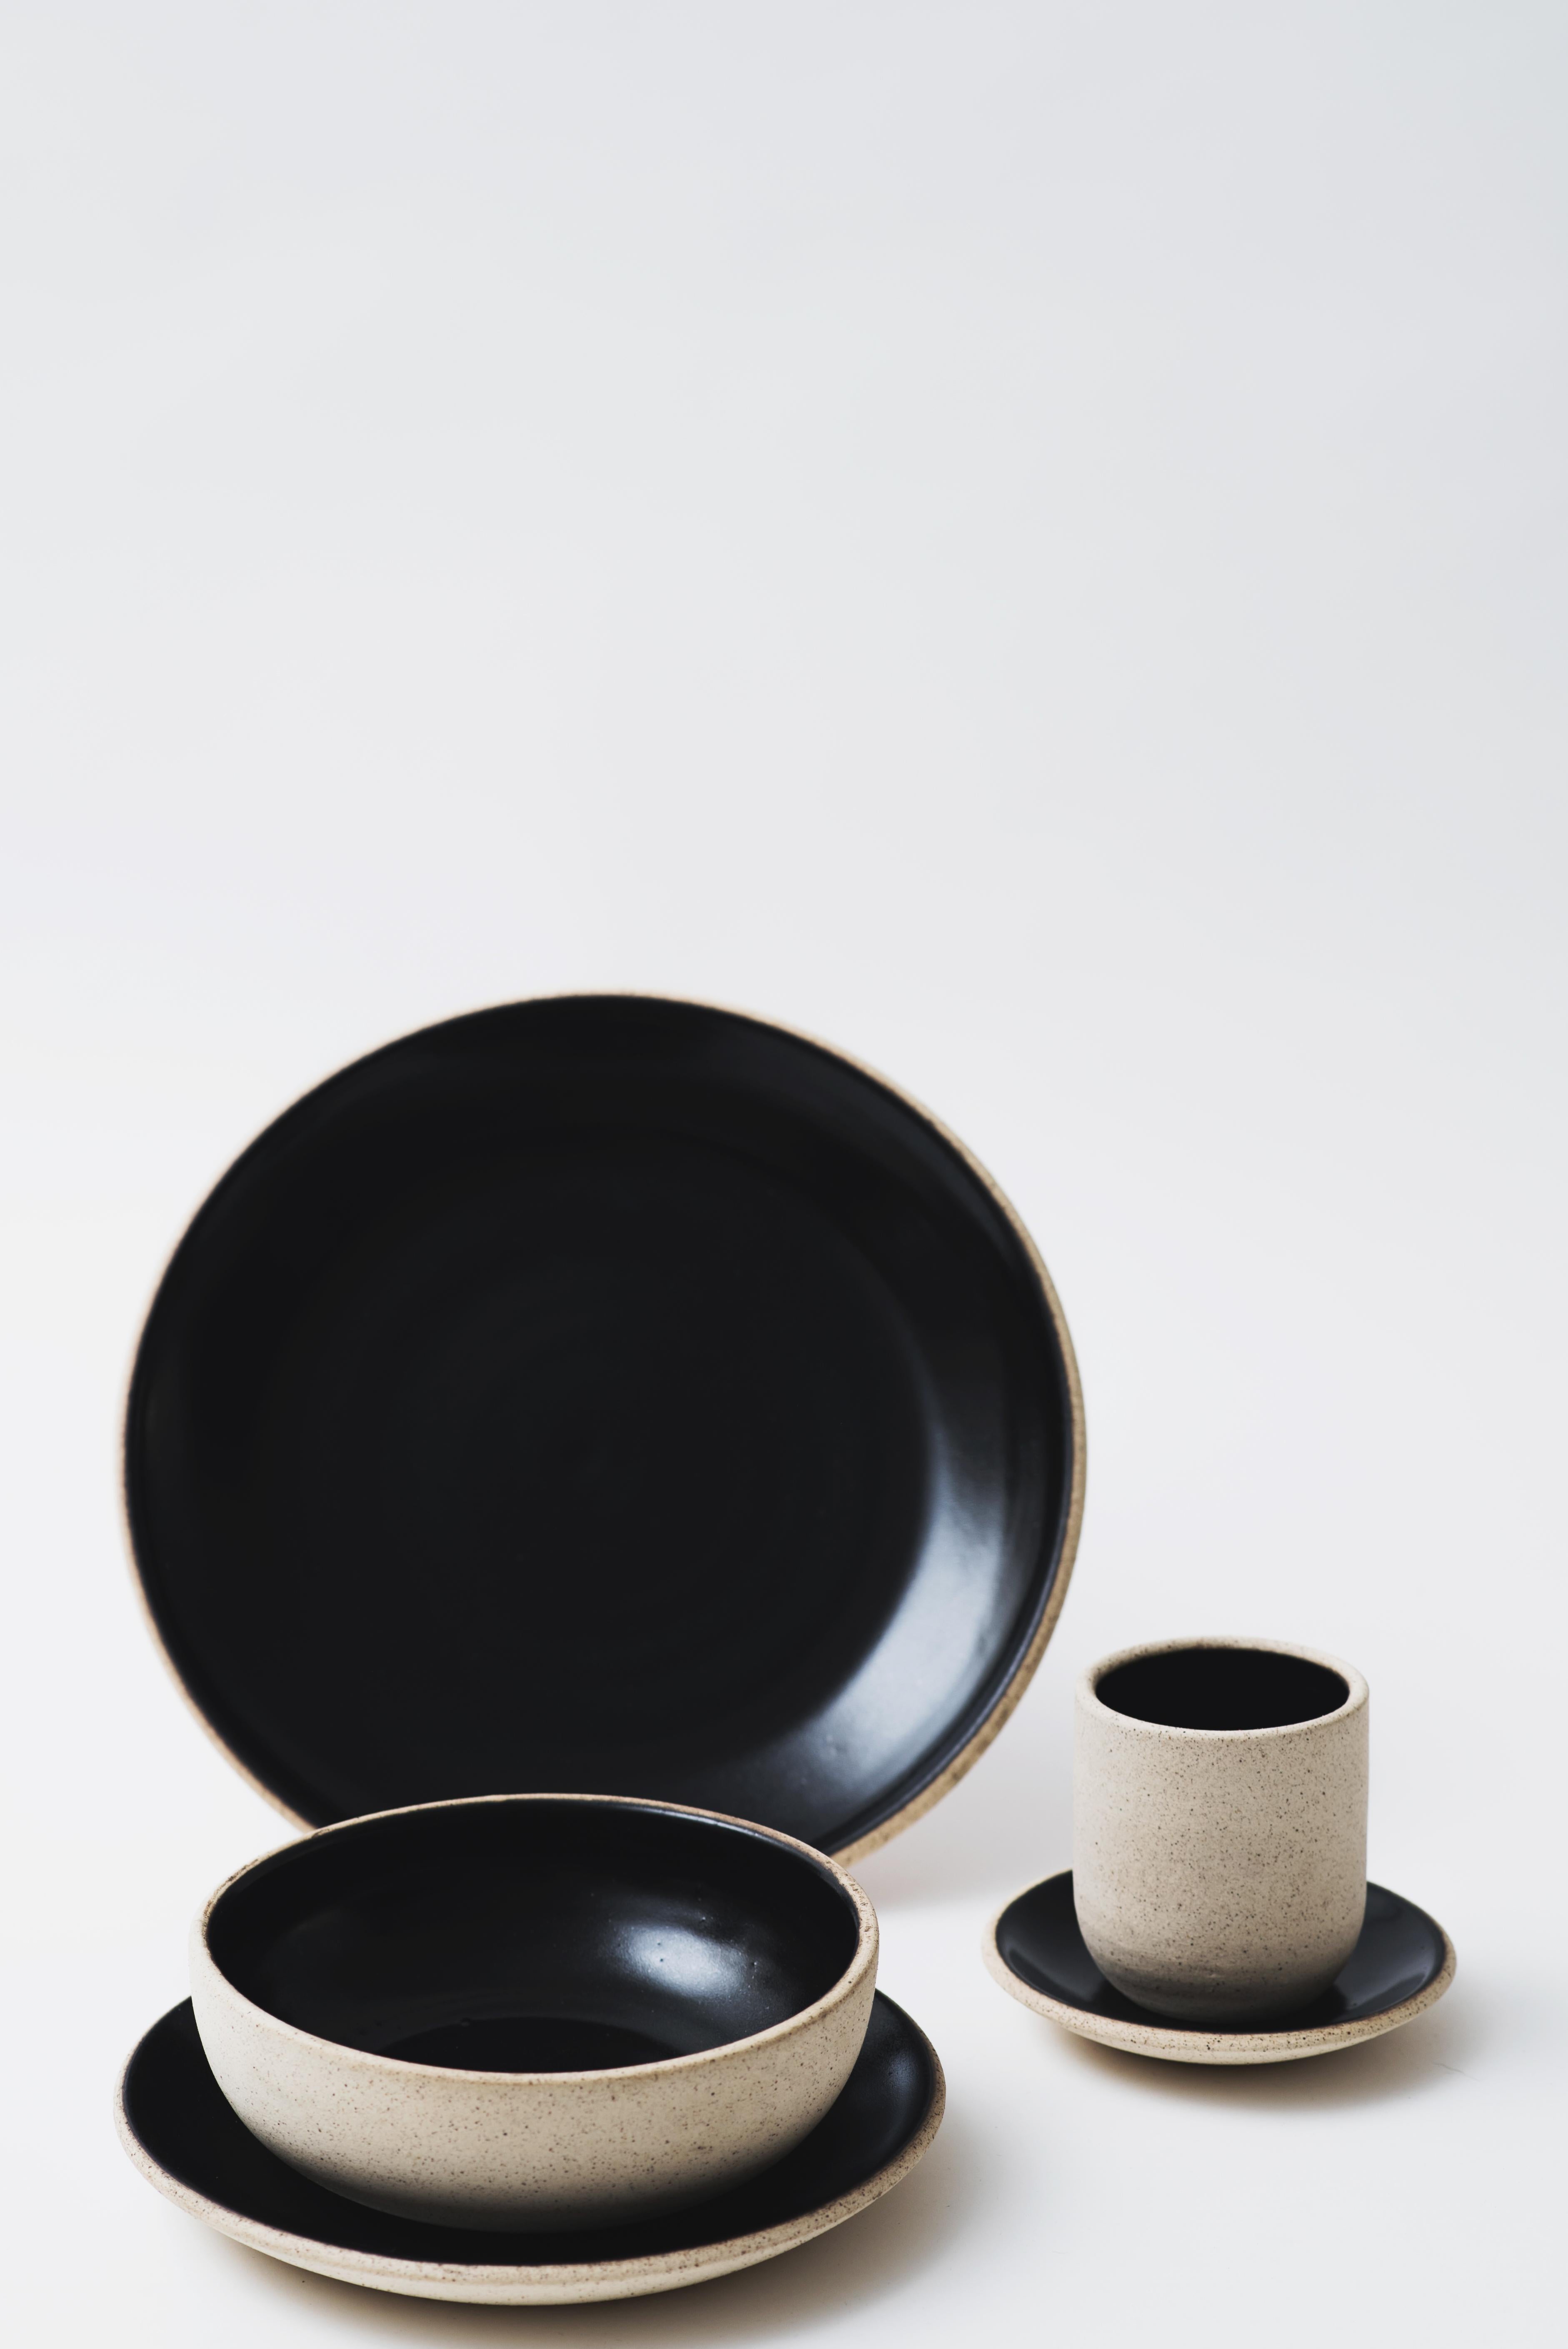 Organic Modern Handmade Ceramic Stoneware Saucer in Black Obsidian and Natural, in Stock